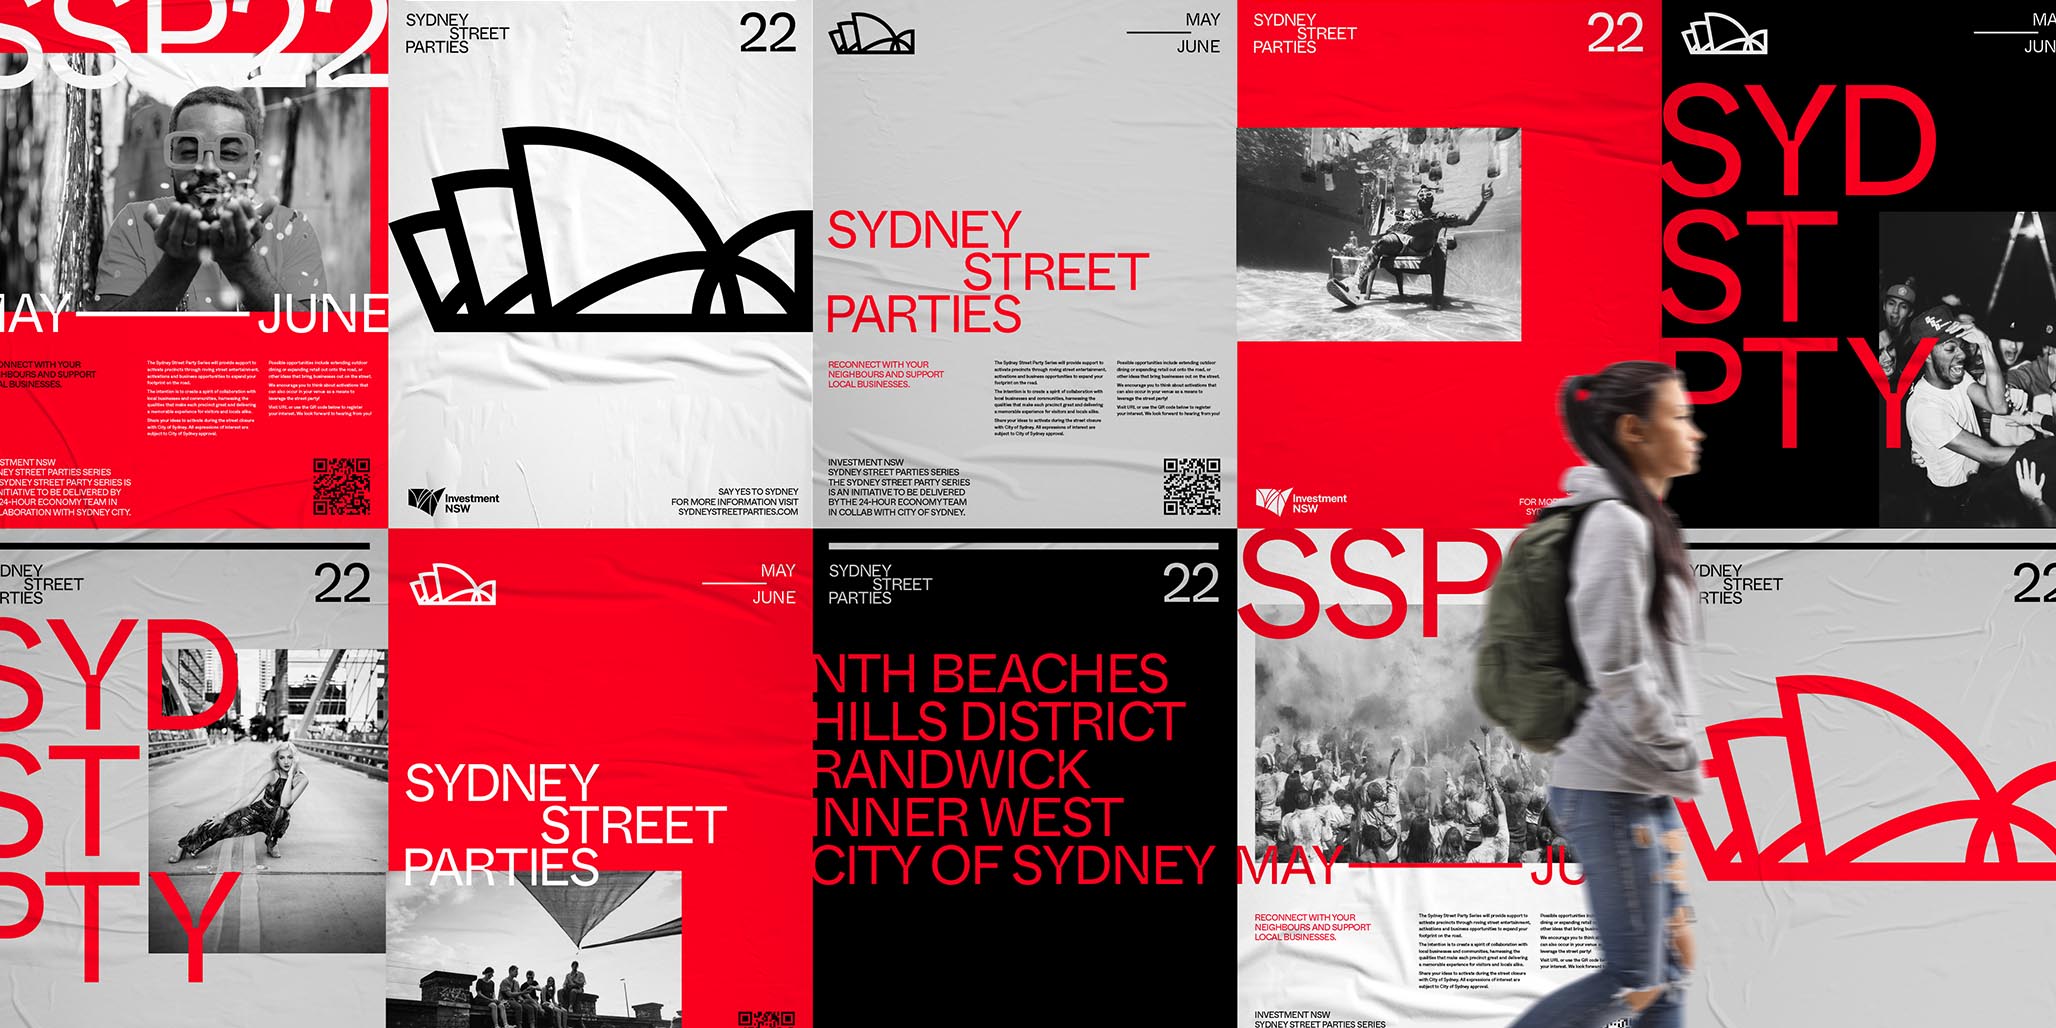 Branding Services for Sydney Street Party, where Percept were among the Branding Agencies selected for this design pitch, image G